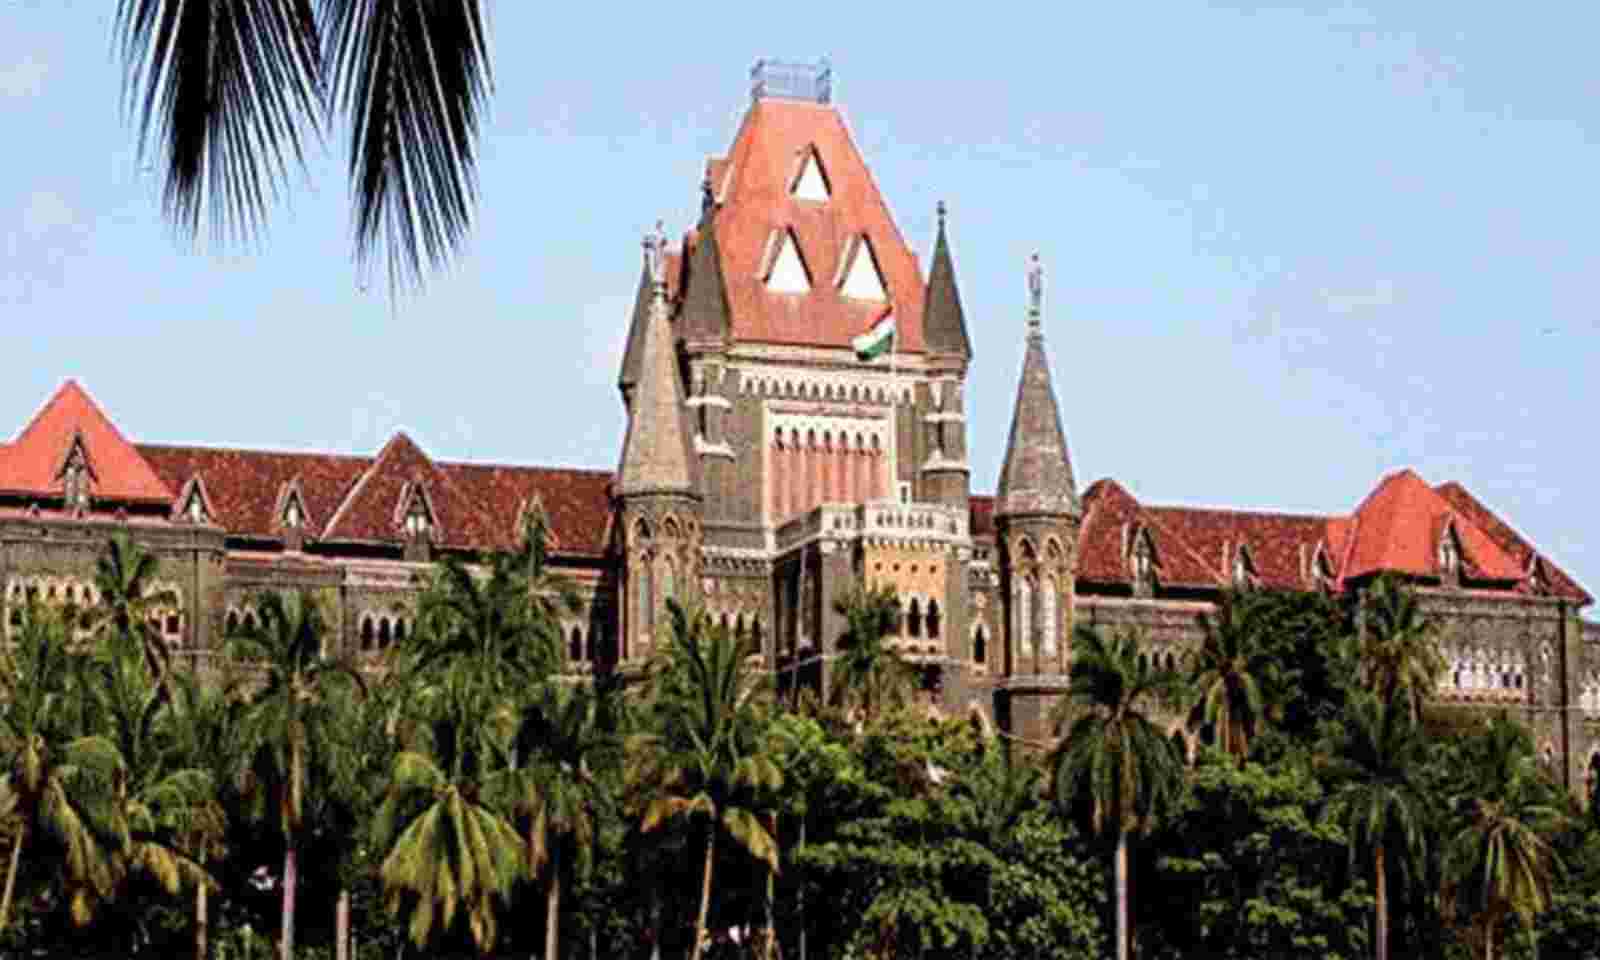 Is Humour Banished From Jail? Even Secondary School Will Have More Books : Bombay High Court On Scanty Book Collection In Prison Library